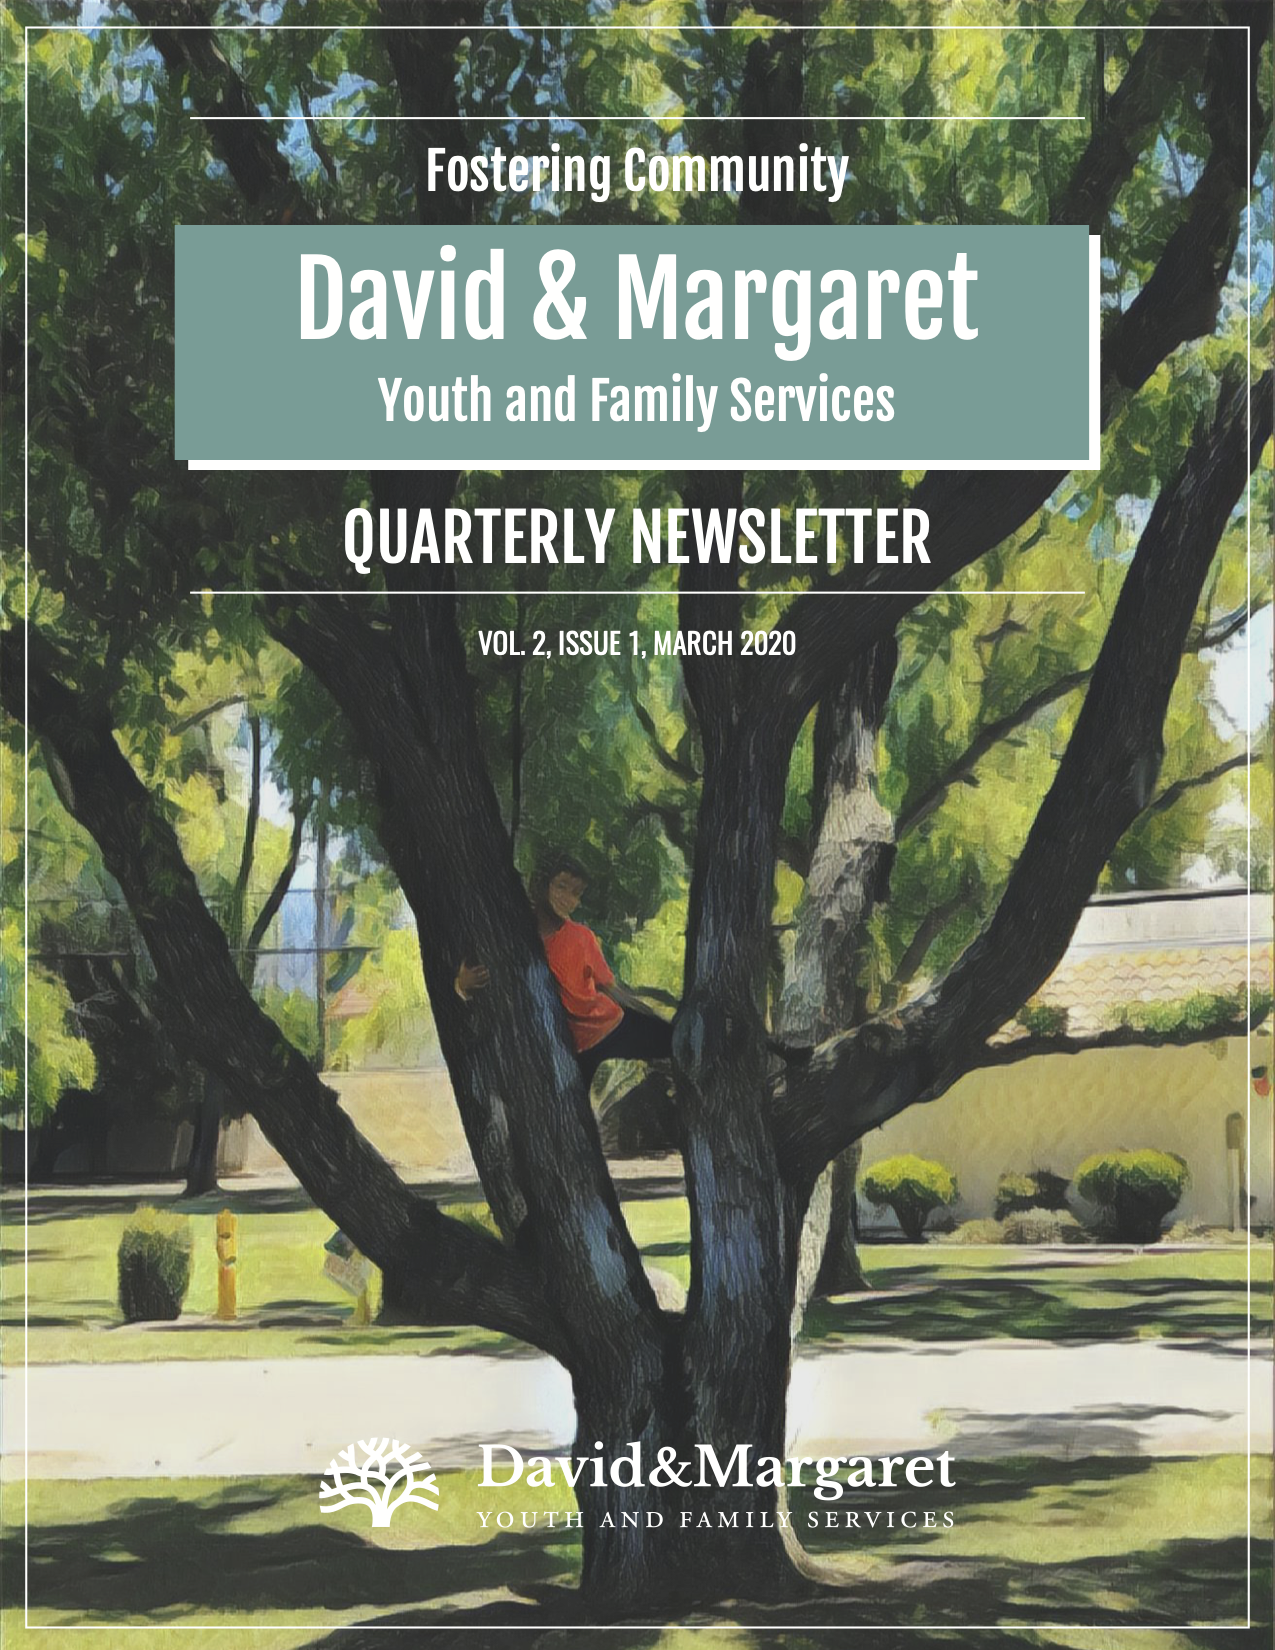 David & Margaret Youth and Family Services Quarterly Newsletter Vol. 2 Issue 1 2020